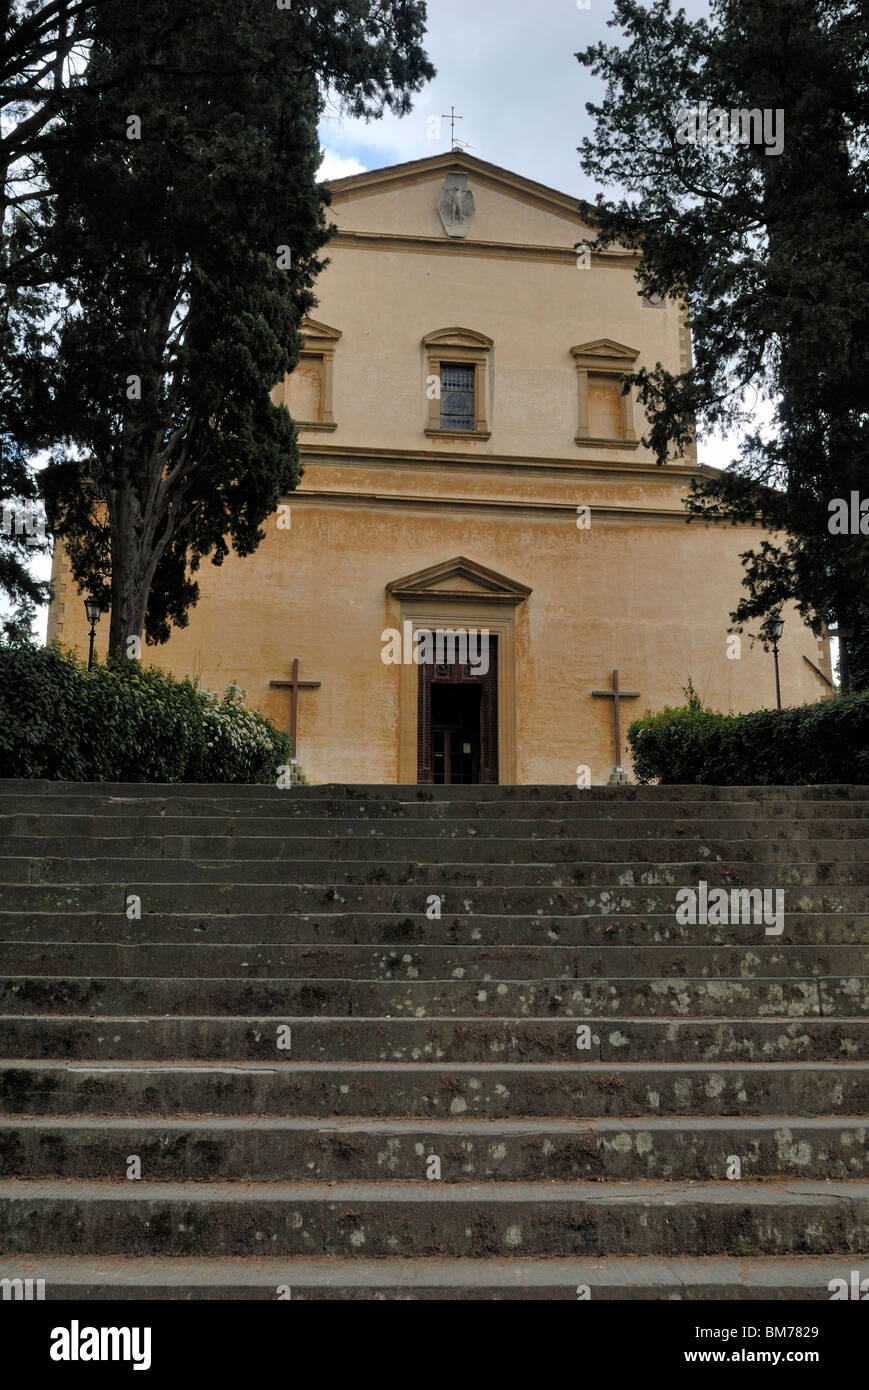 A Franciscan Church of San Salvatore al Monte alle Croci. The former church dates back to 1417. The Church was redesigned by ... Stock Photo